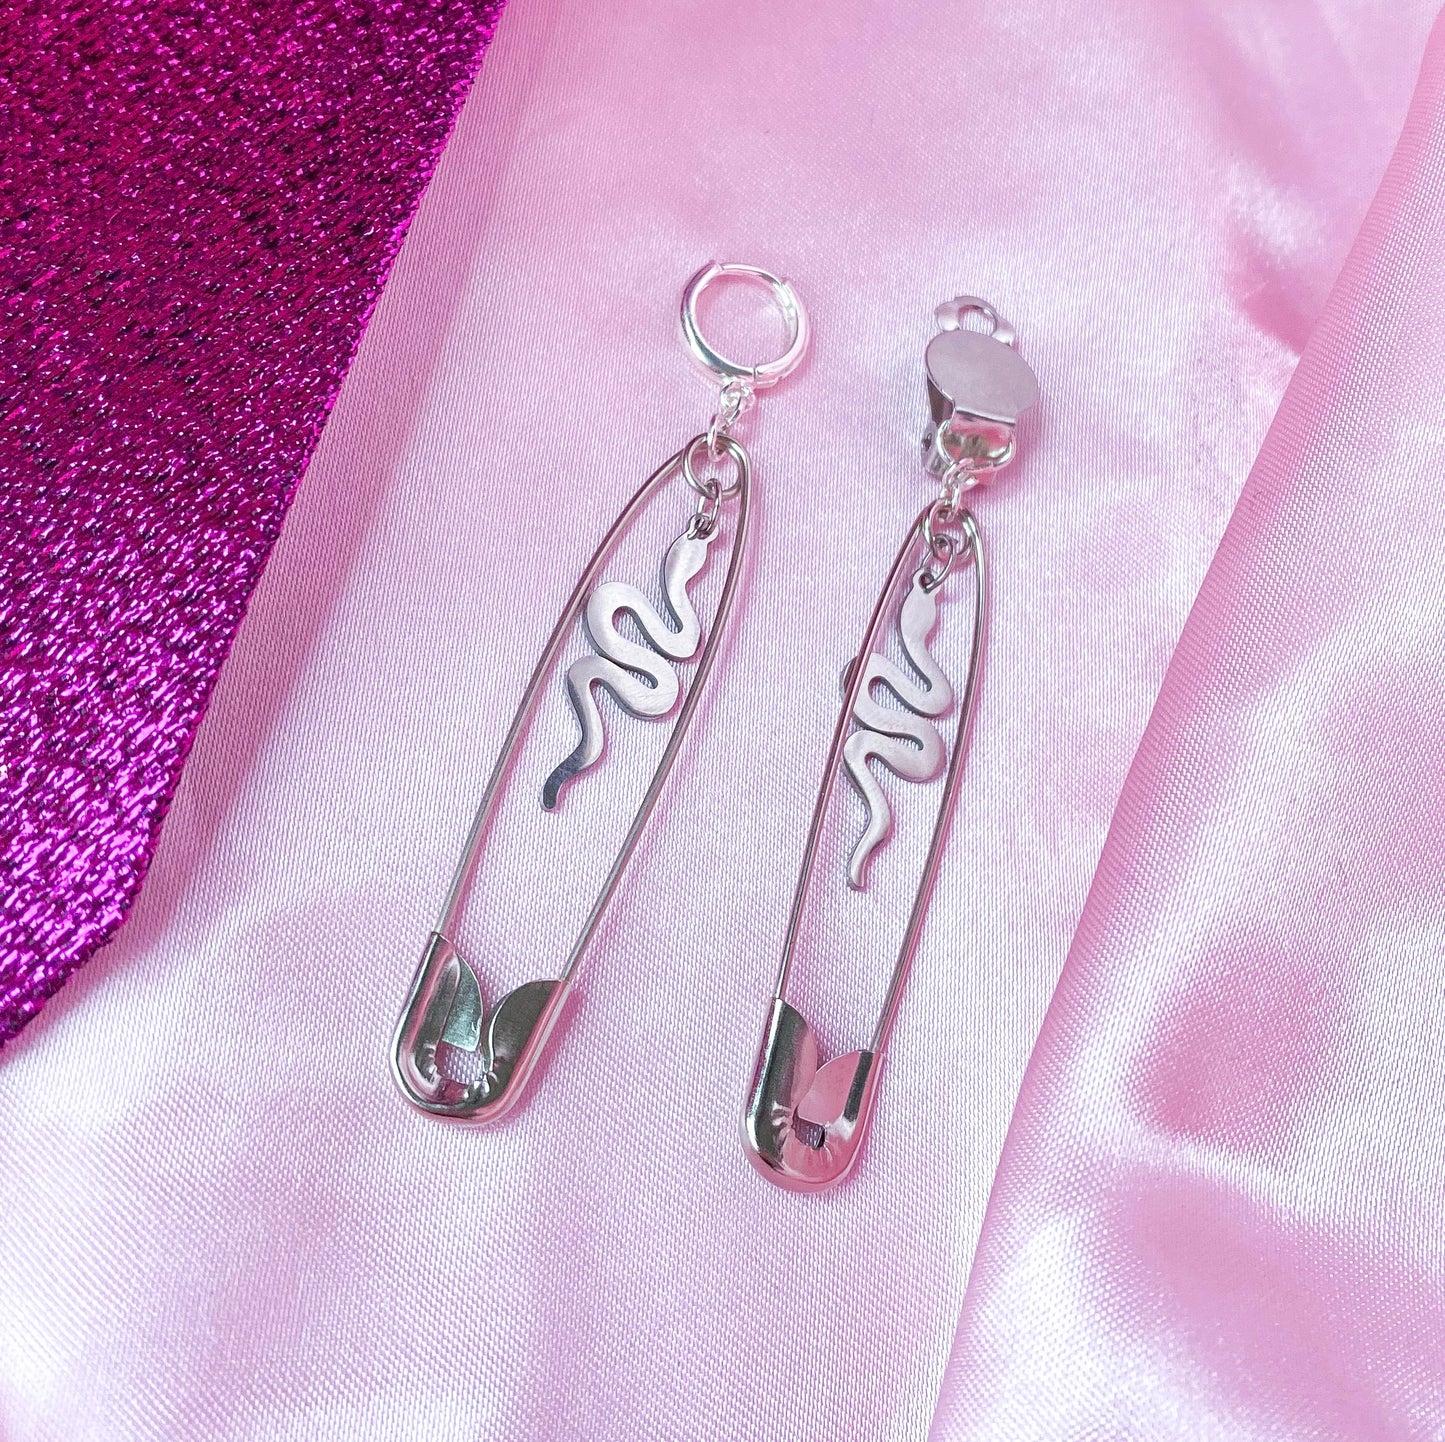 Safety pin earrings with snake charms